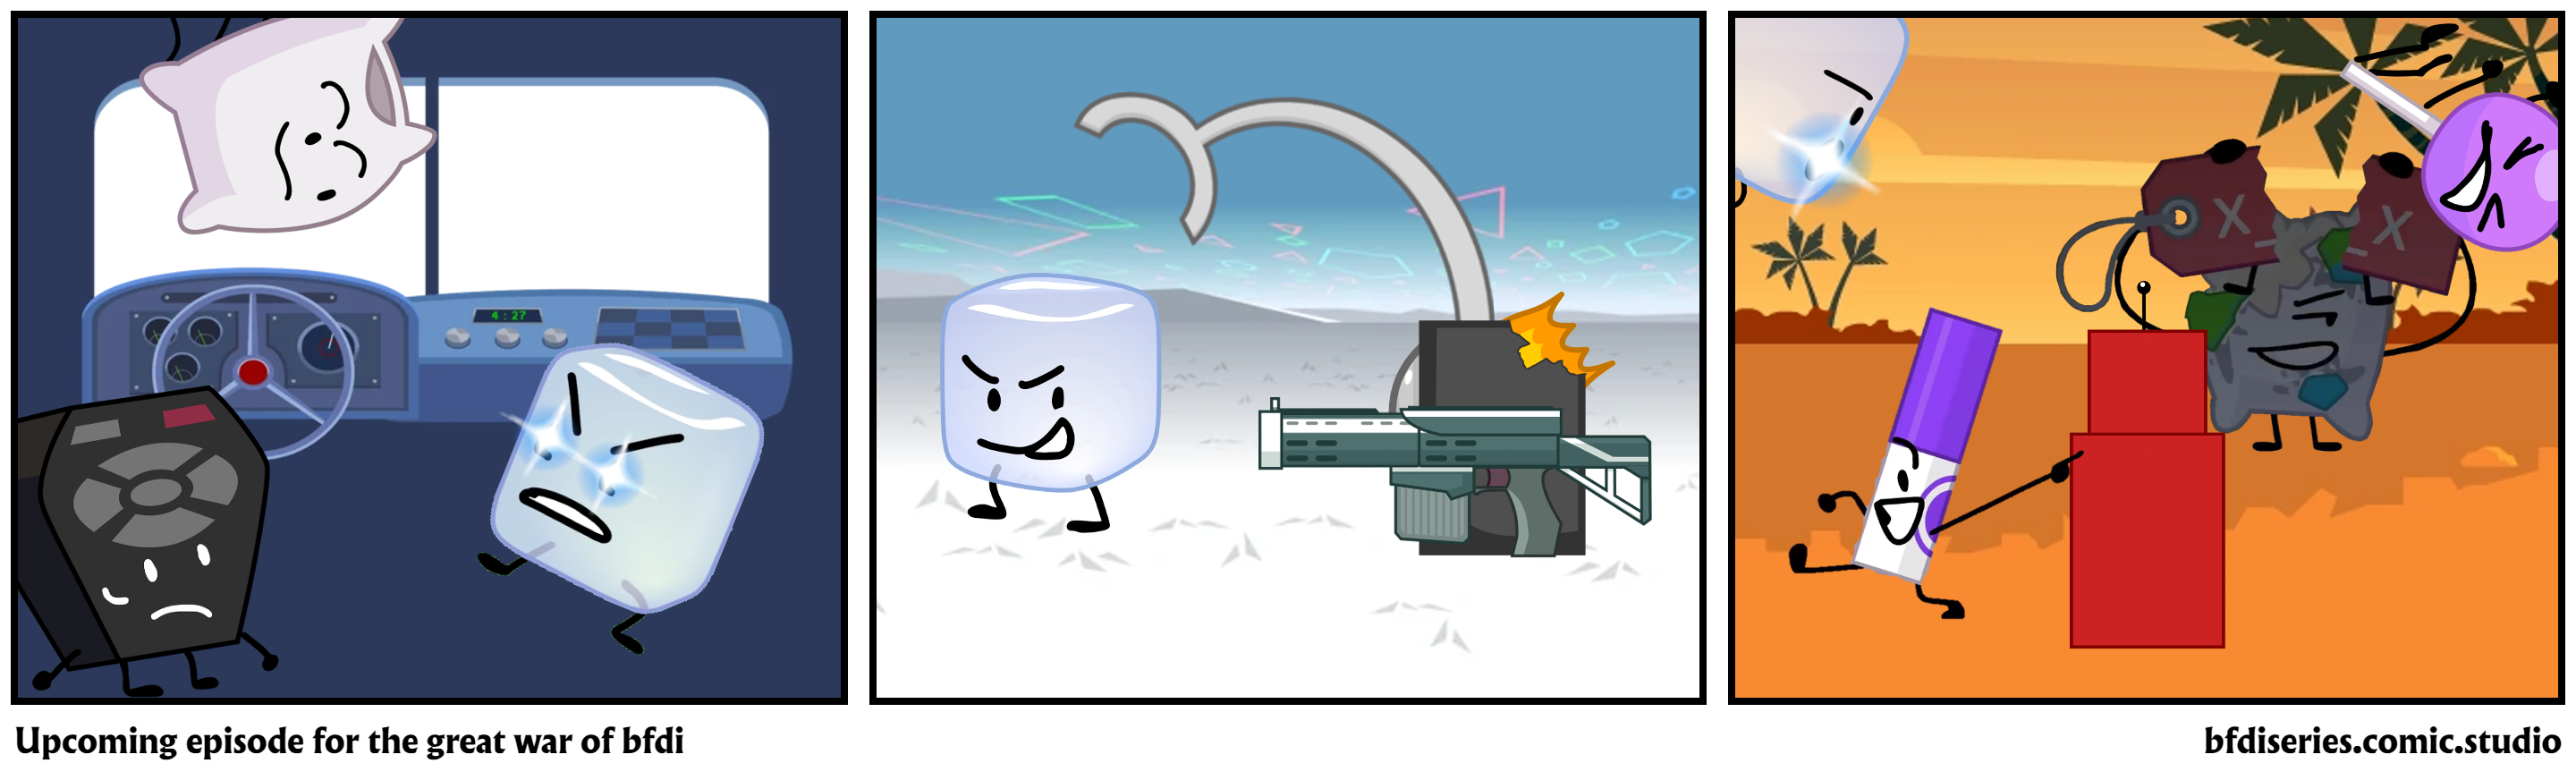 Upcoming episode for the great war of bfdi